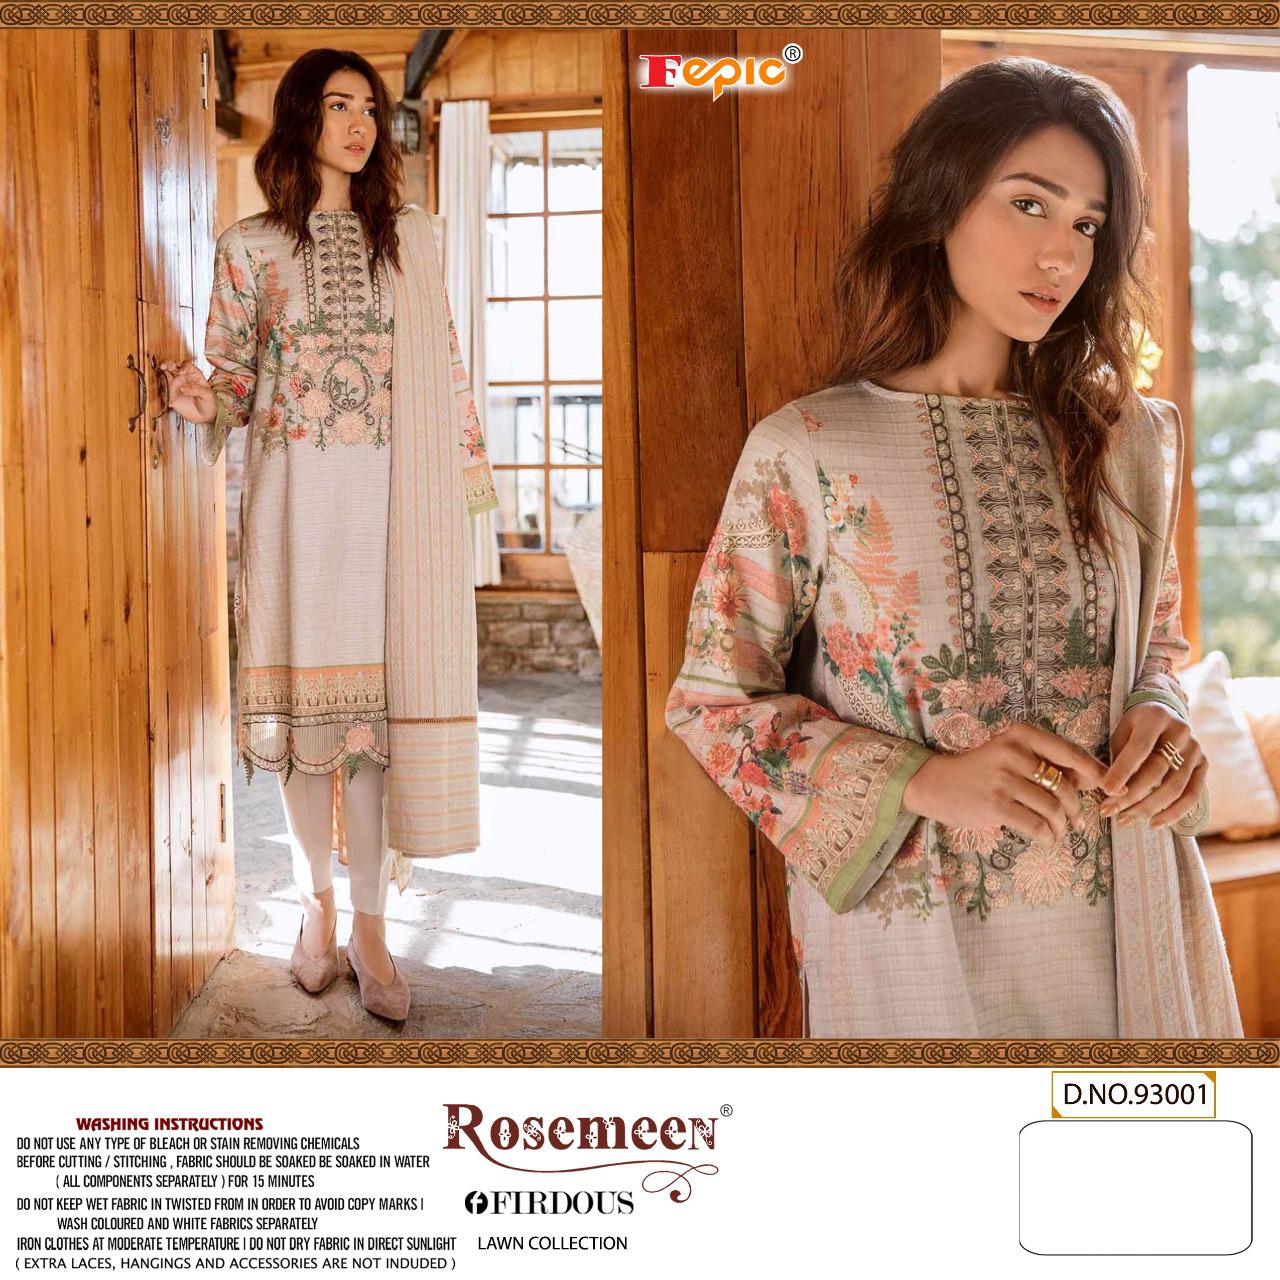 Fepic Rosemeen Firdous Lawn Collection 93001